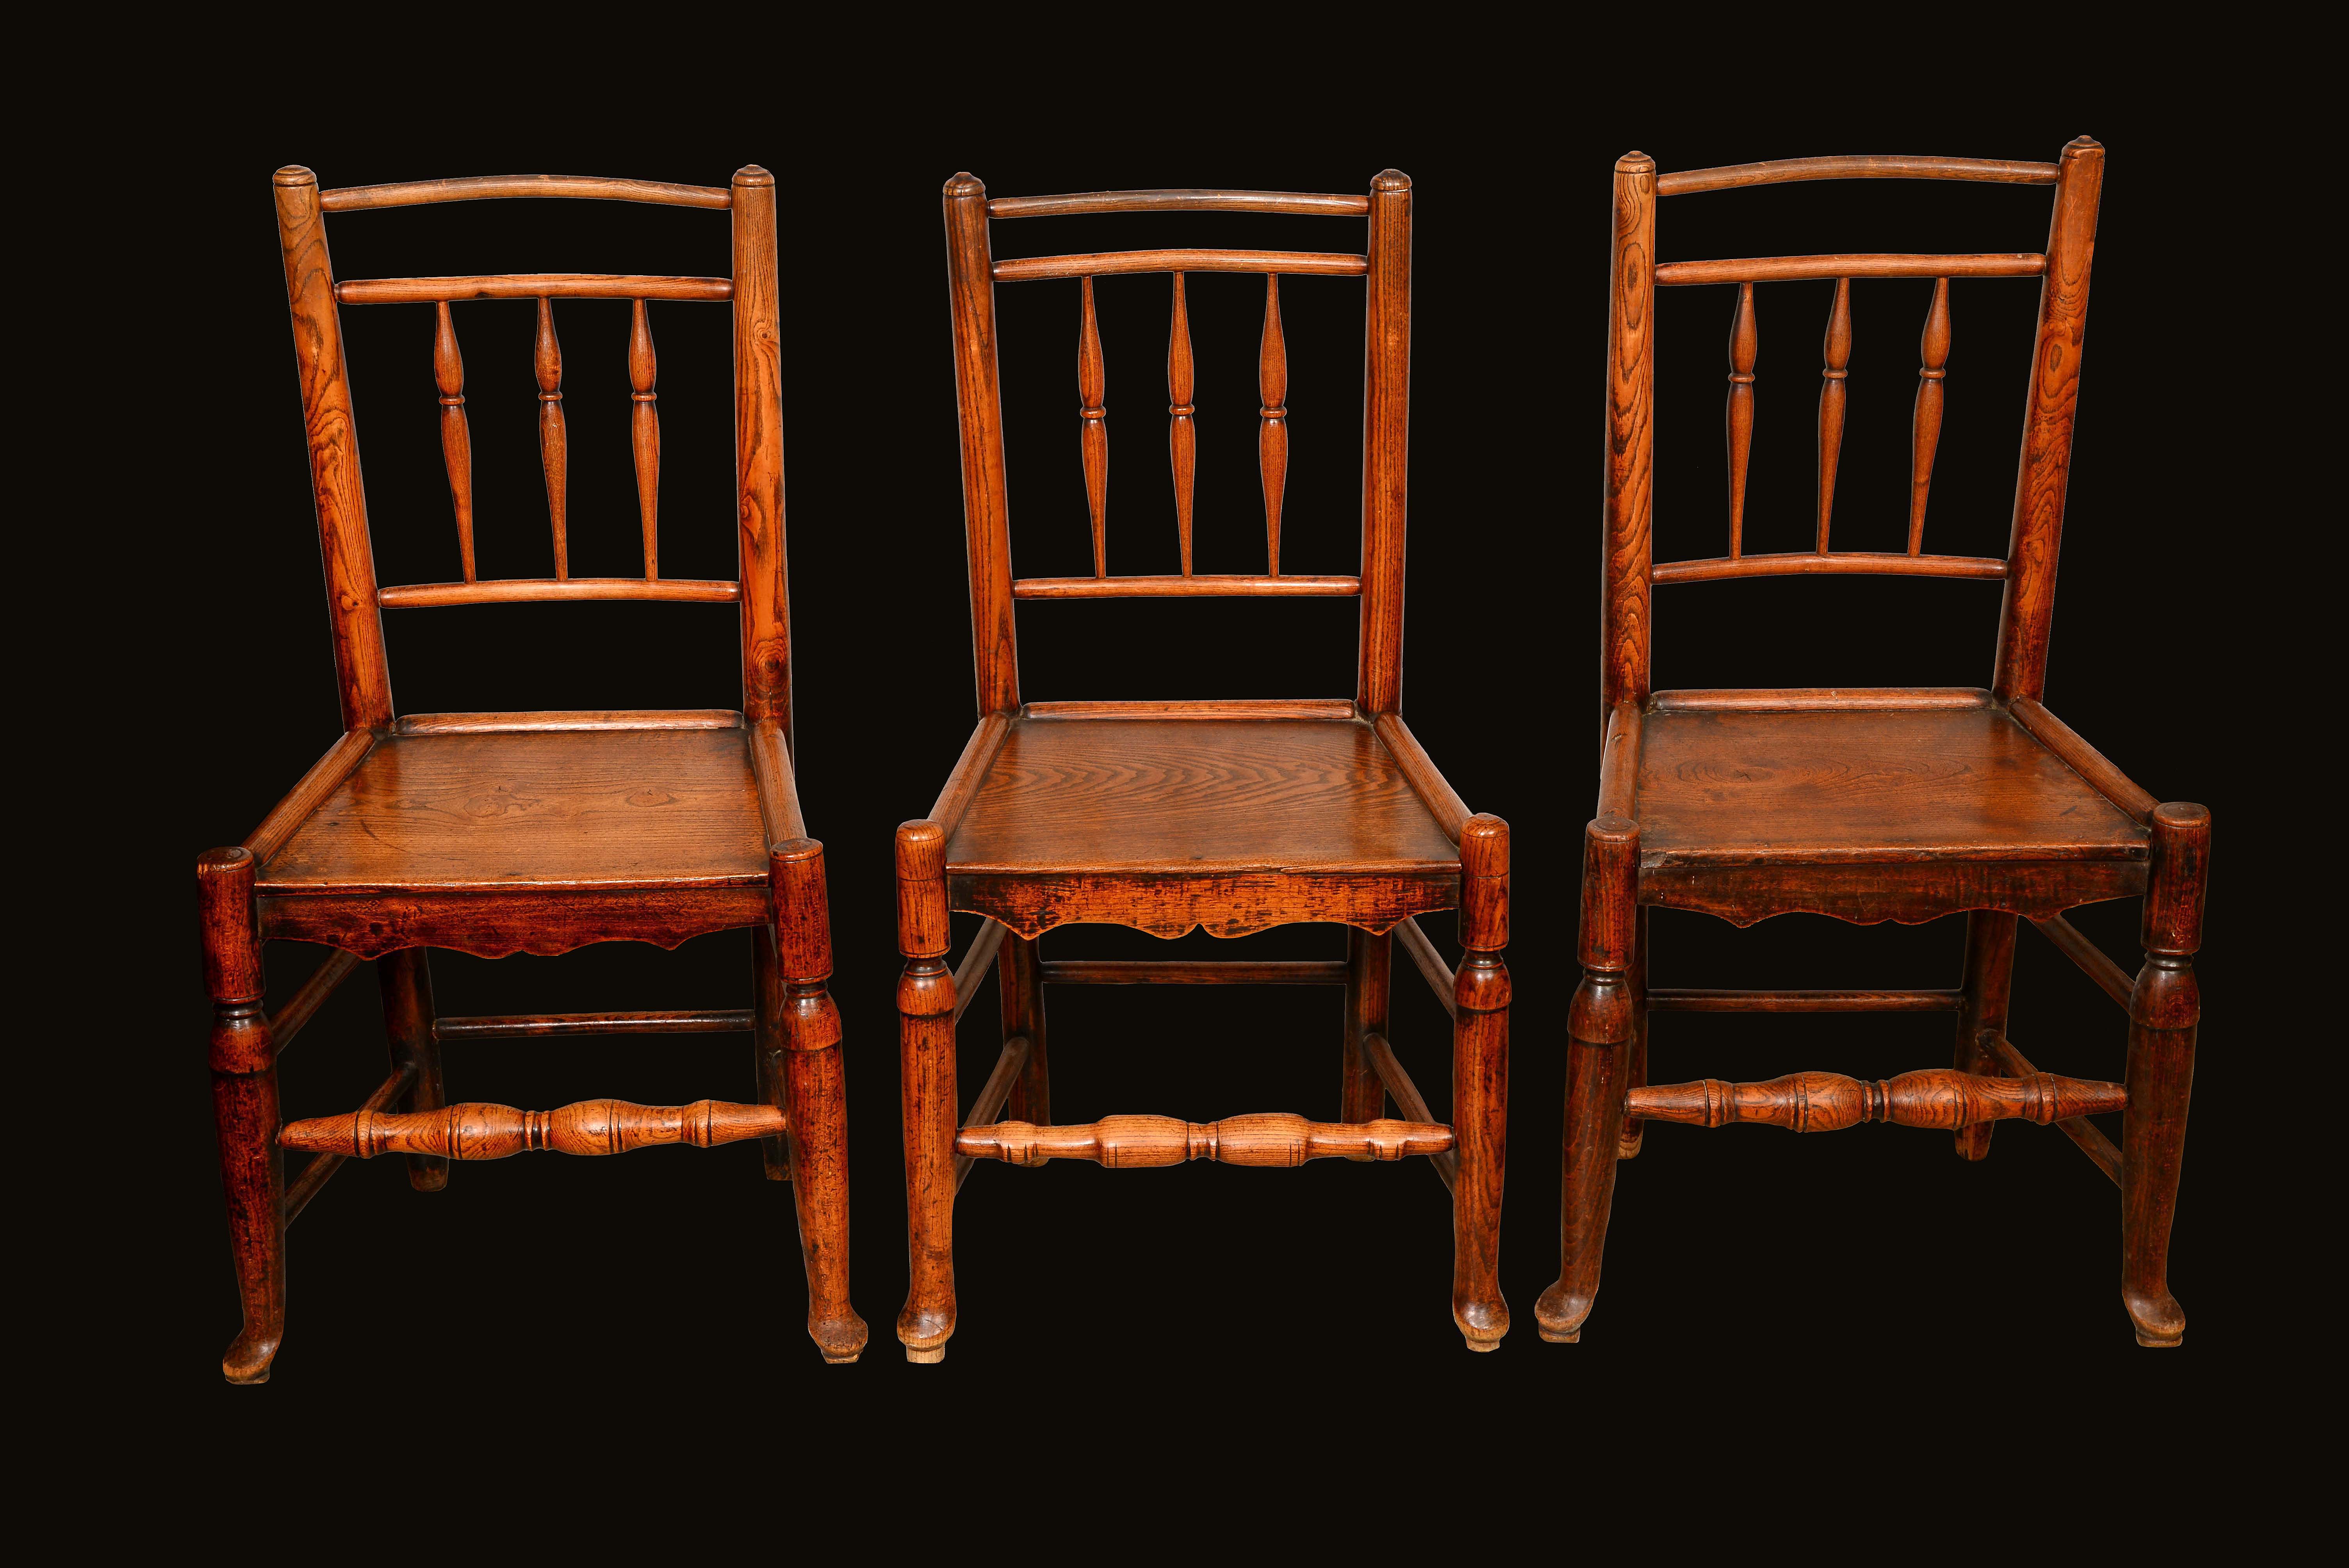 A harlequin set of six 19th century elm and ash dining chairs, turned spindle backs, panelled seats, - Image 2 of 2